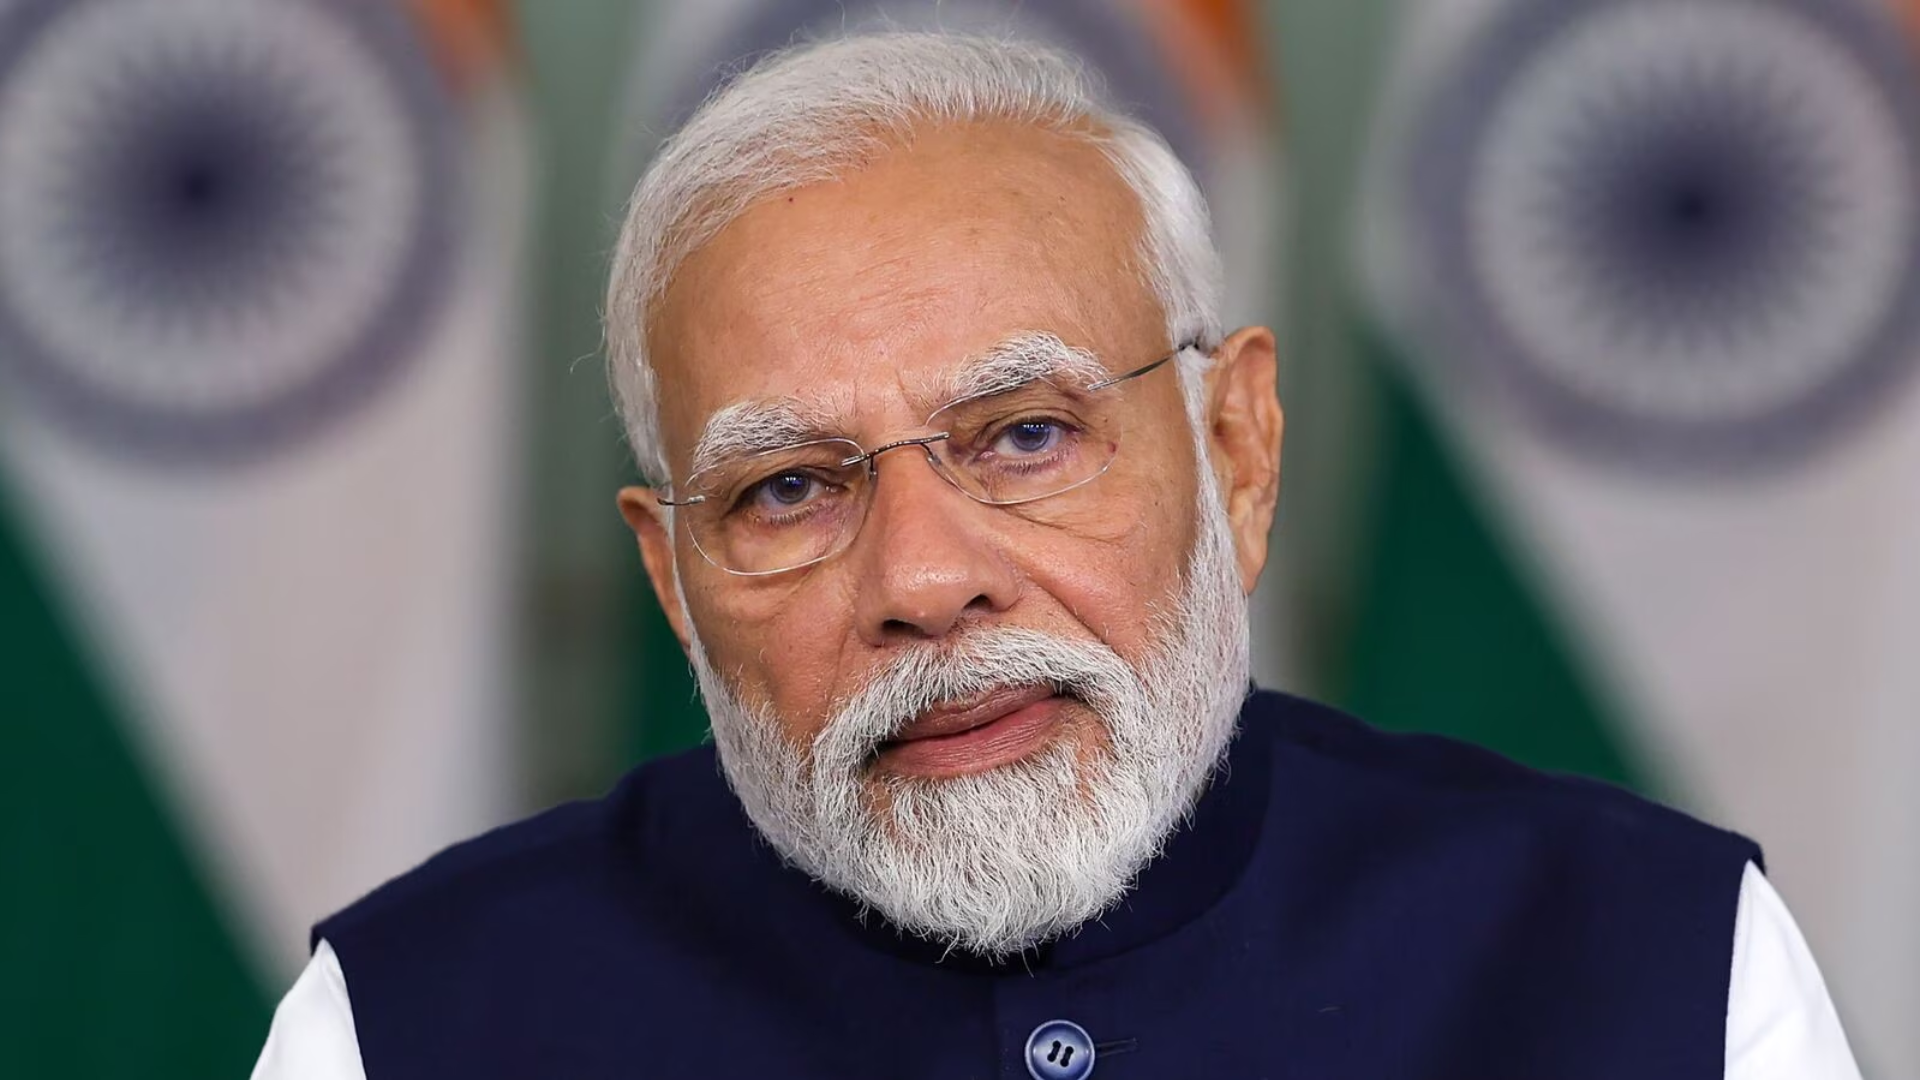 PM Narendra Modi’s Photo Removed From Covid Vaccine Certificates, Here’s Why